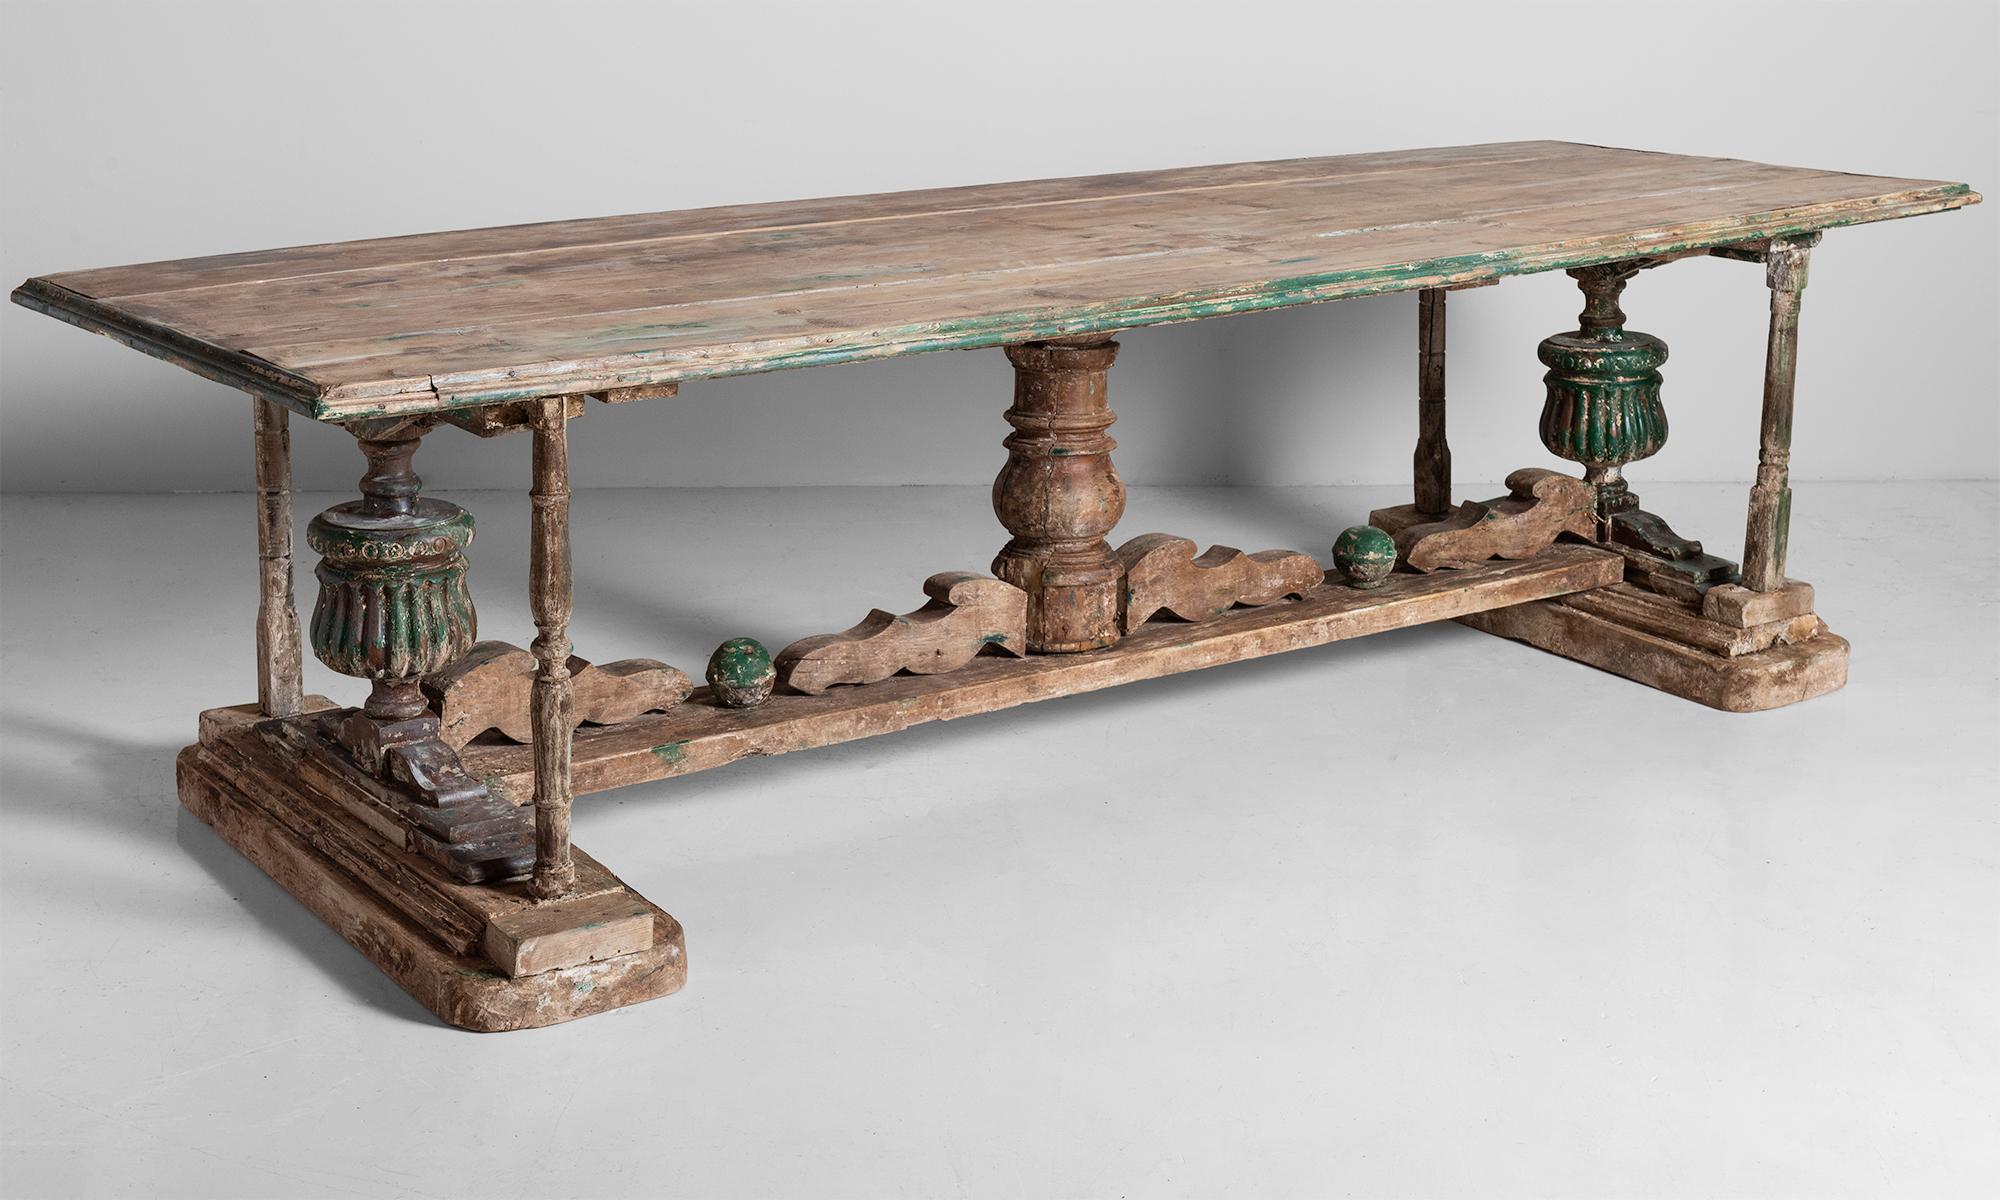 Carved dining table, Italy, 18th century.

Heavily patinated rustic form with traces of original paint and wonderful decorative carved details on base.